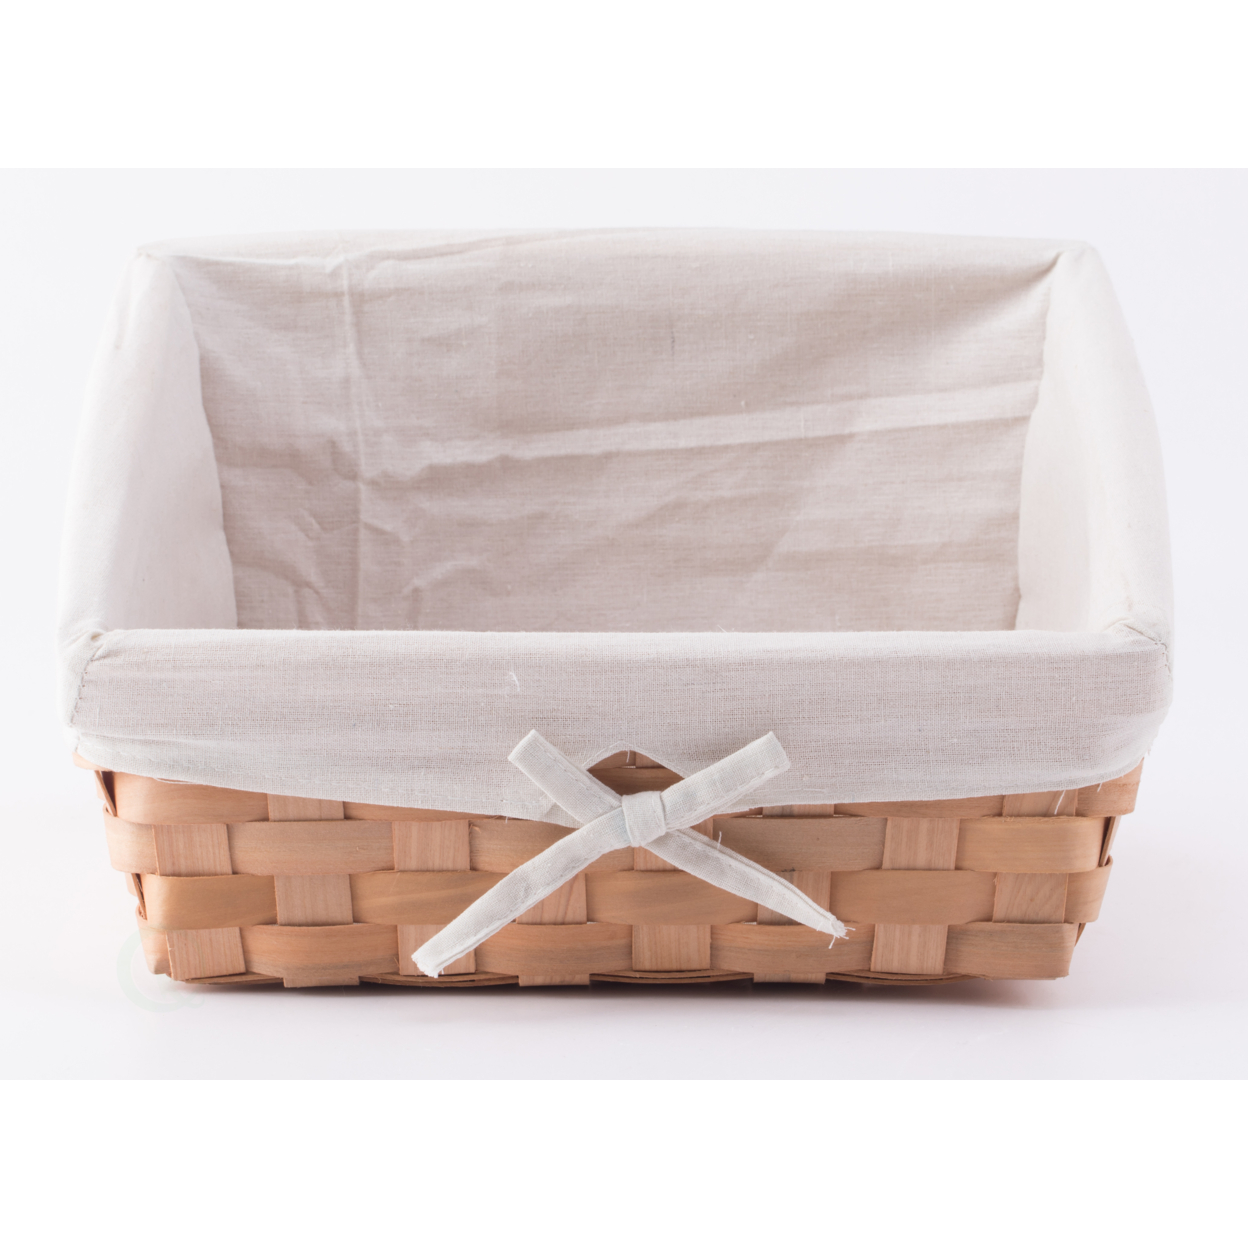 Wooden Angled Display Basket With Fabric Liner For Storage And Display